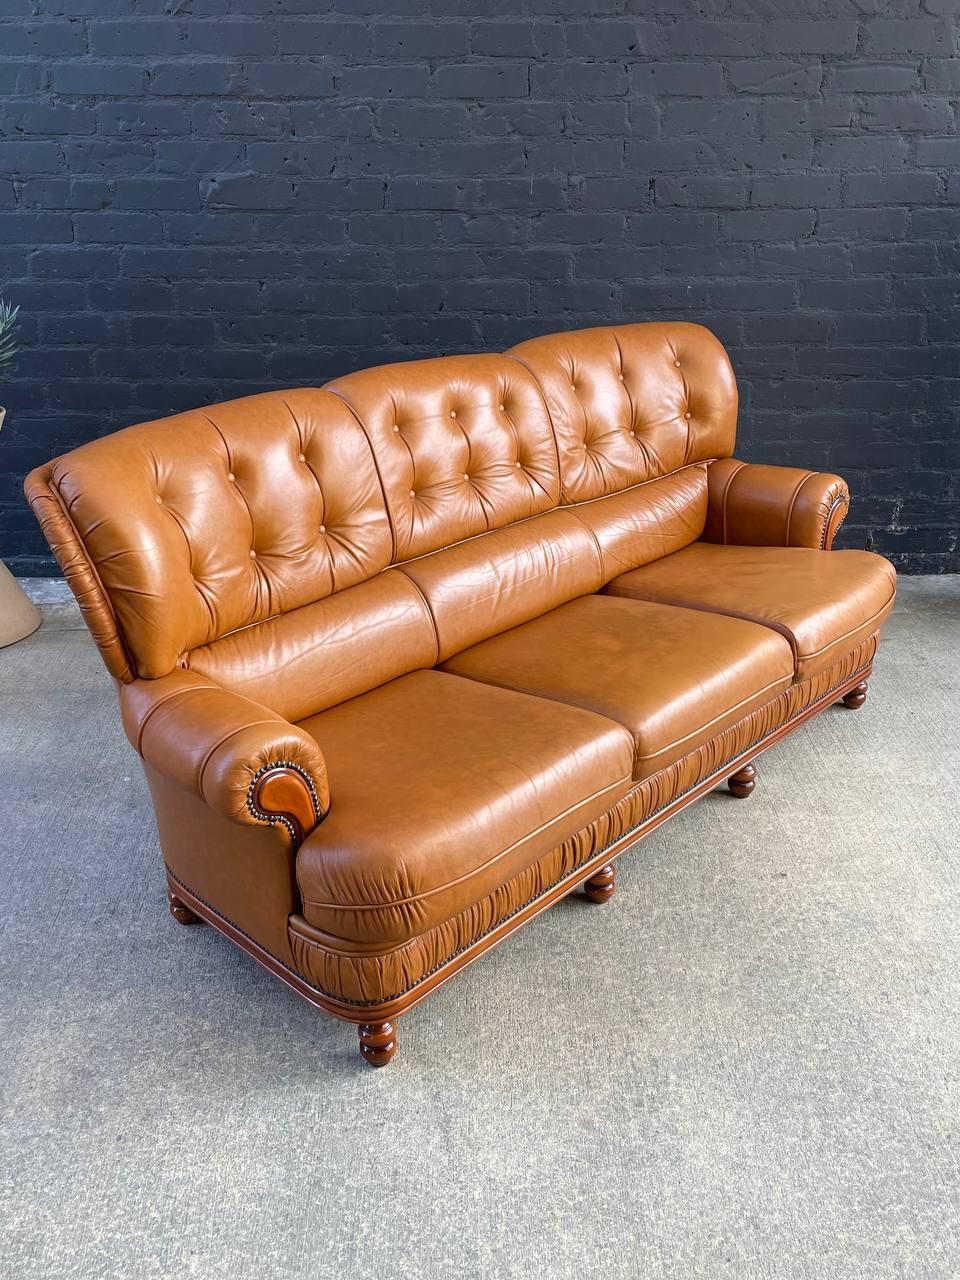 Original Vintage Condition

Dimensions: 
35”H x 79.50”W x 35”D
Seat Height 16.50”

Materials: Honey Brown Leather, Maple Wood
